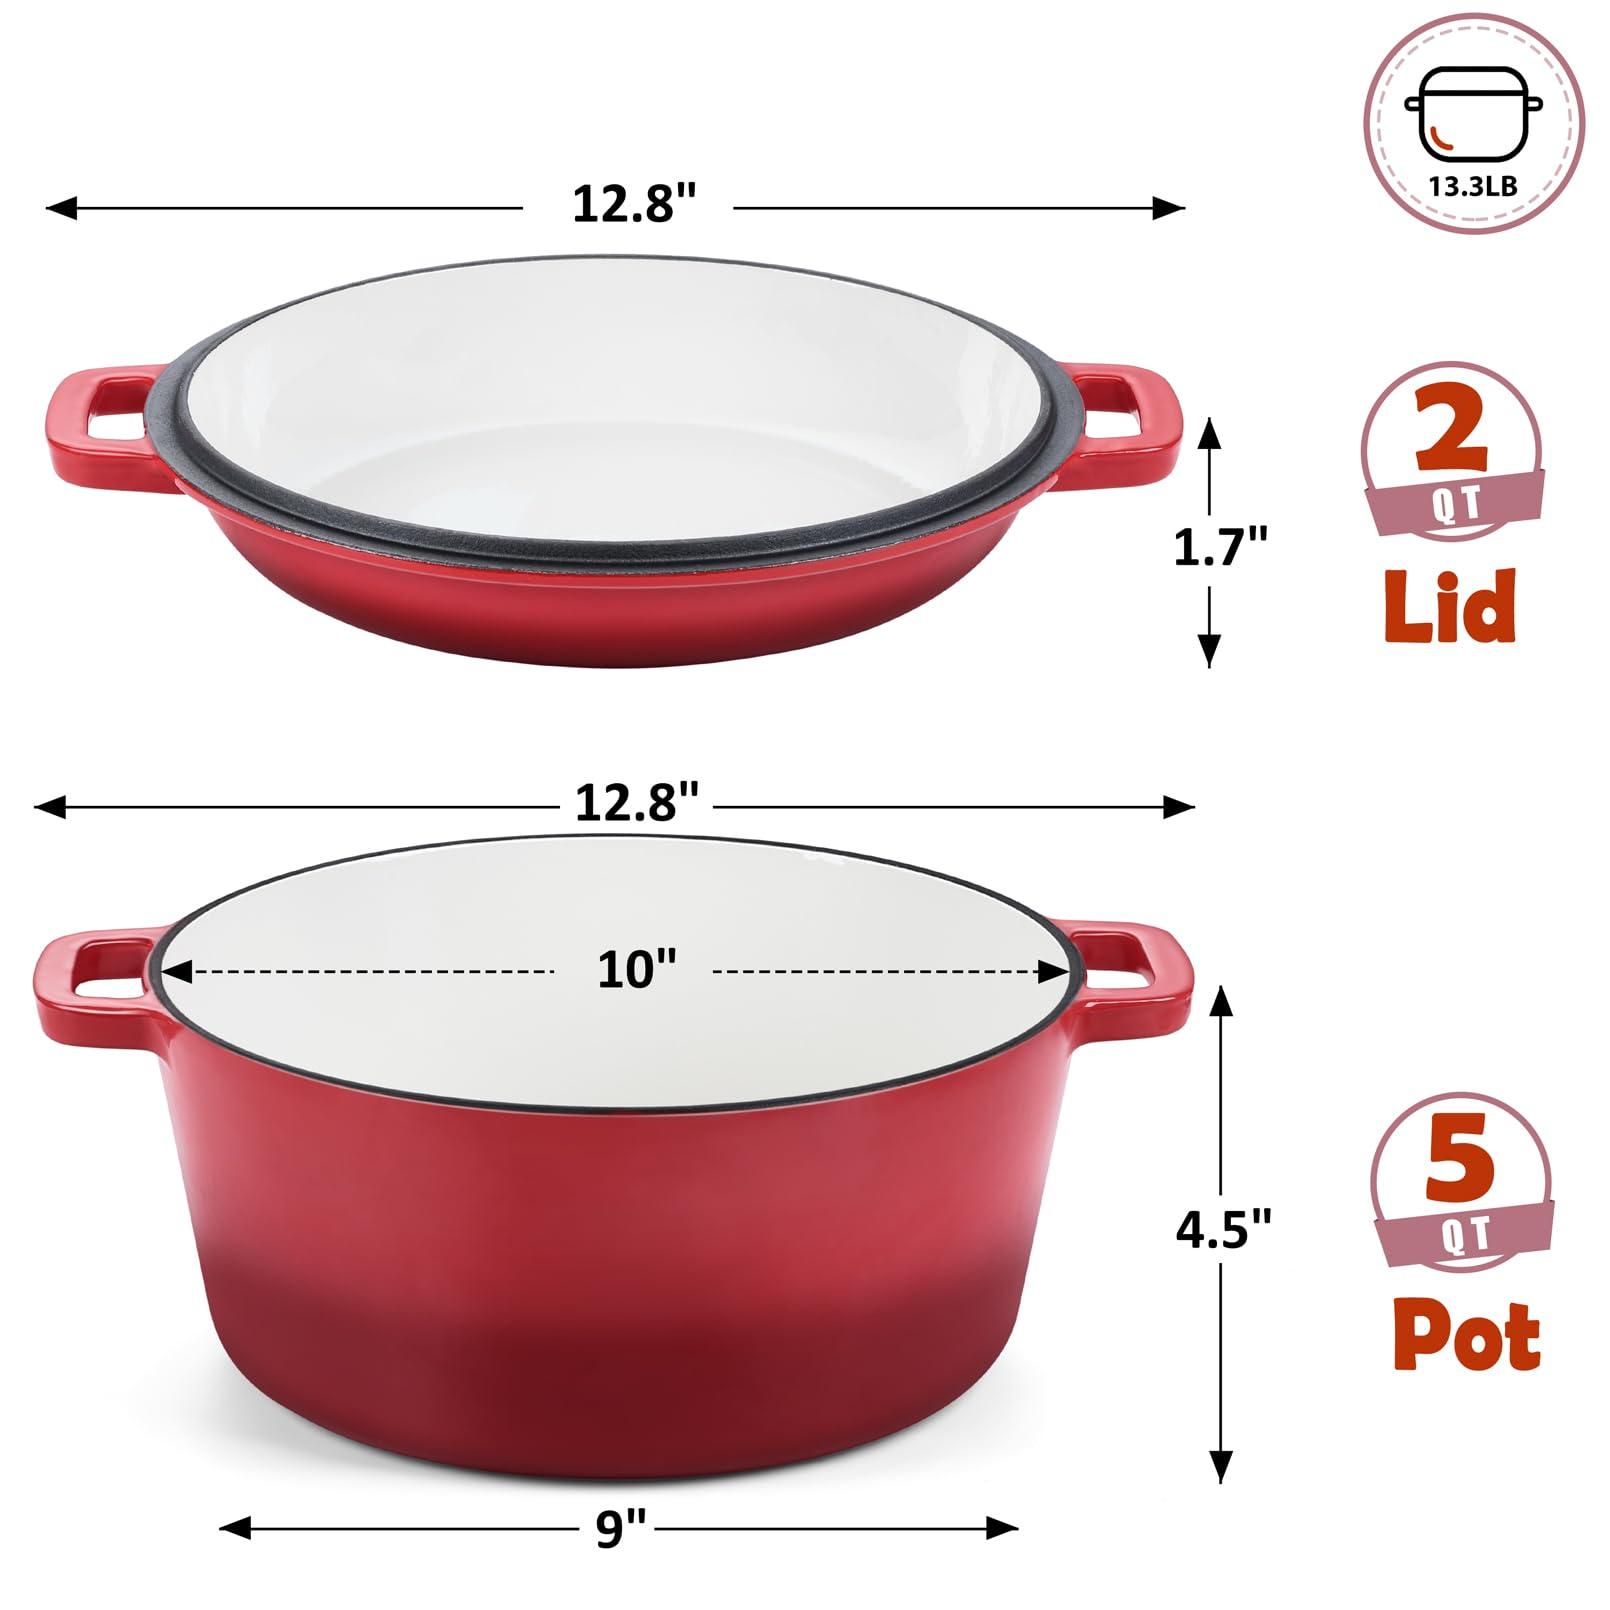 TeamFar 2-In-1 Enameled Cast Iron Dutch Oven, 5 Quart Dutch Oven Pot Cookware with Skillet Lid for Bread Baking Braising Stewing Roasting, Heavy-Duty & Nonstick, Oven Safe & Fit for Induction (Red) - CookCave